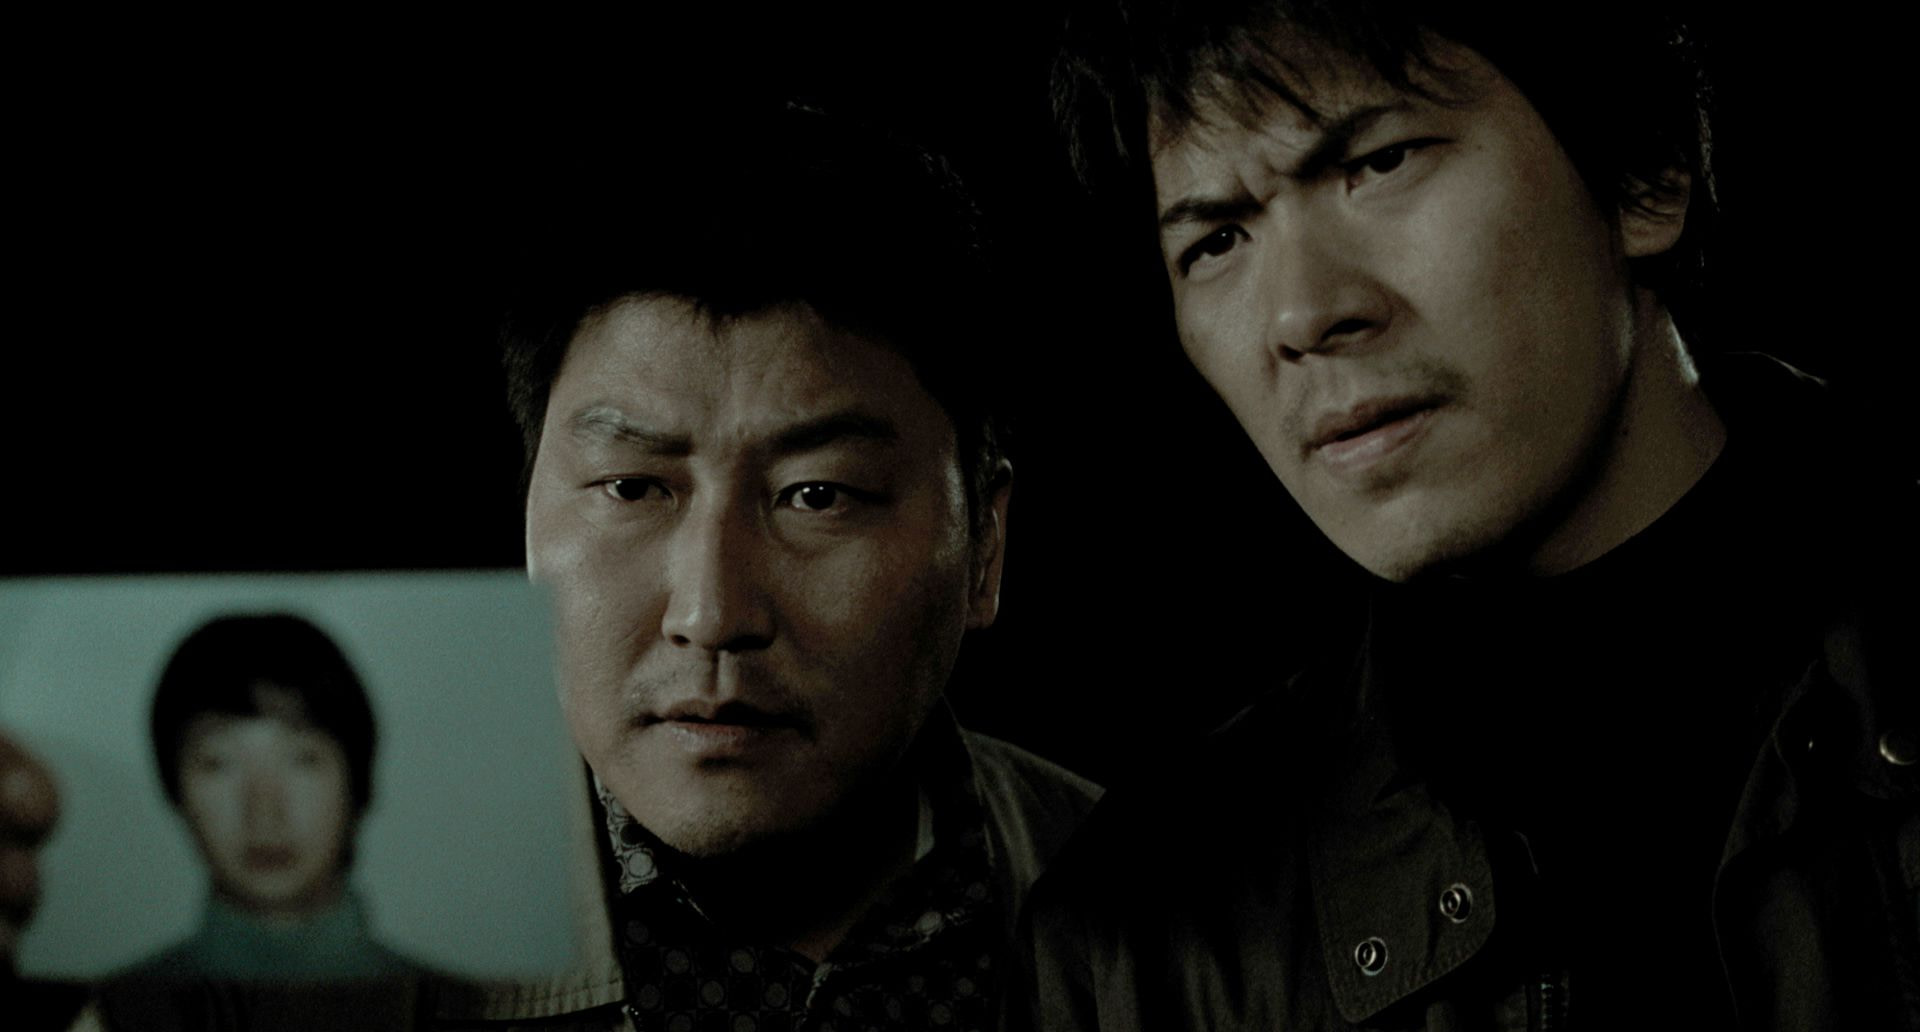 Detective Park (Song Kang-ho) and Seo (Kim Sang-kyung) holds the photo of murder suspect Park Hyeon-gyu (Park Hae-il ) in Memories of Murder